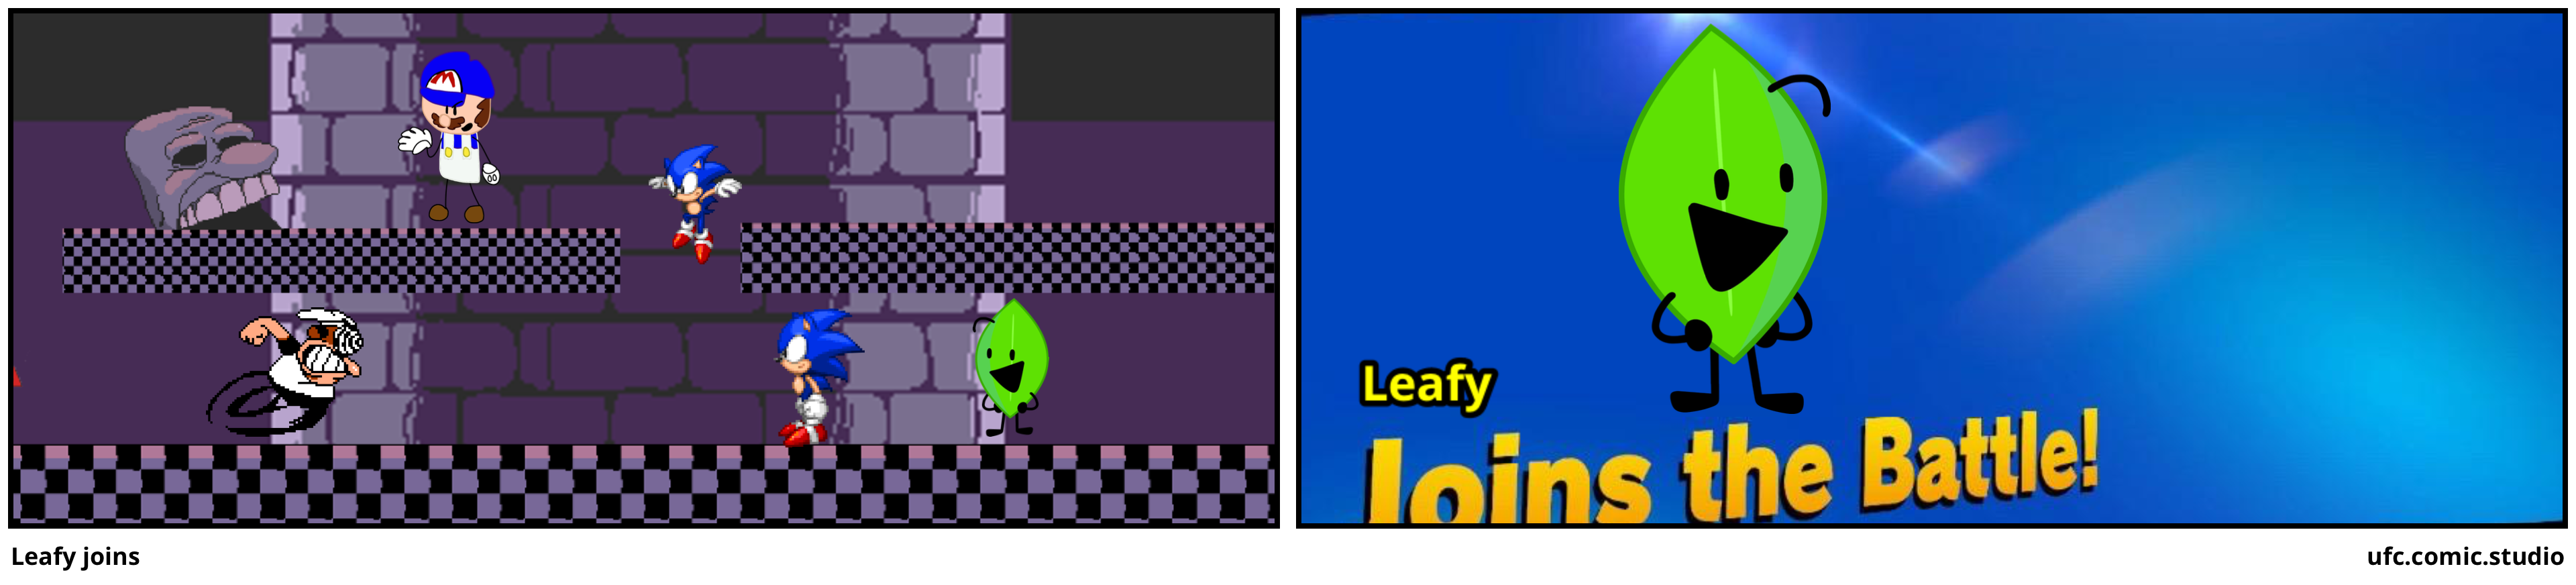 Leafy joins